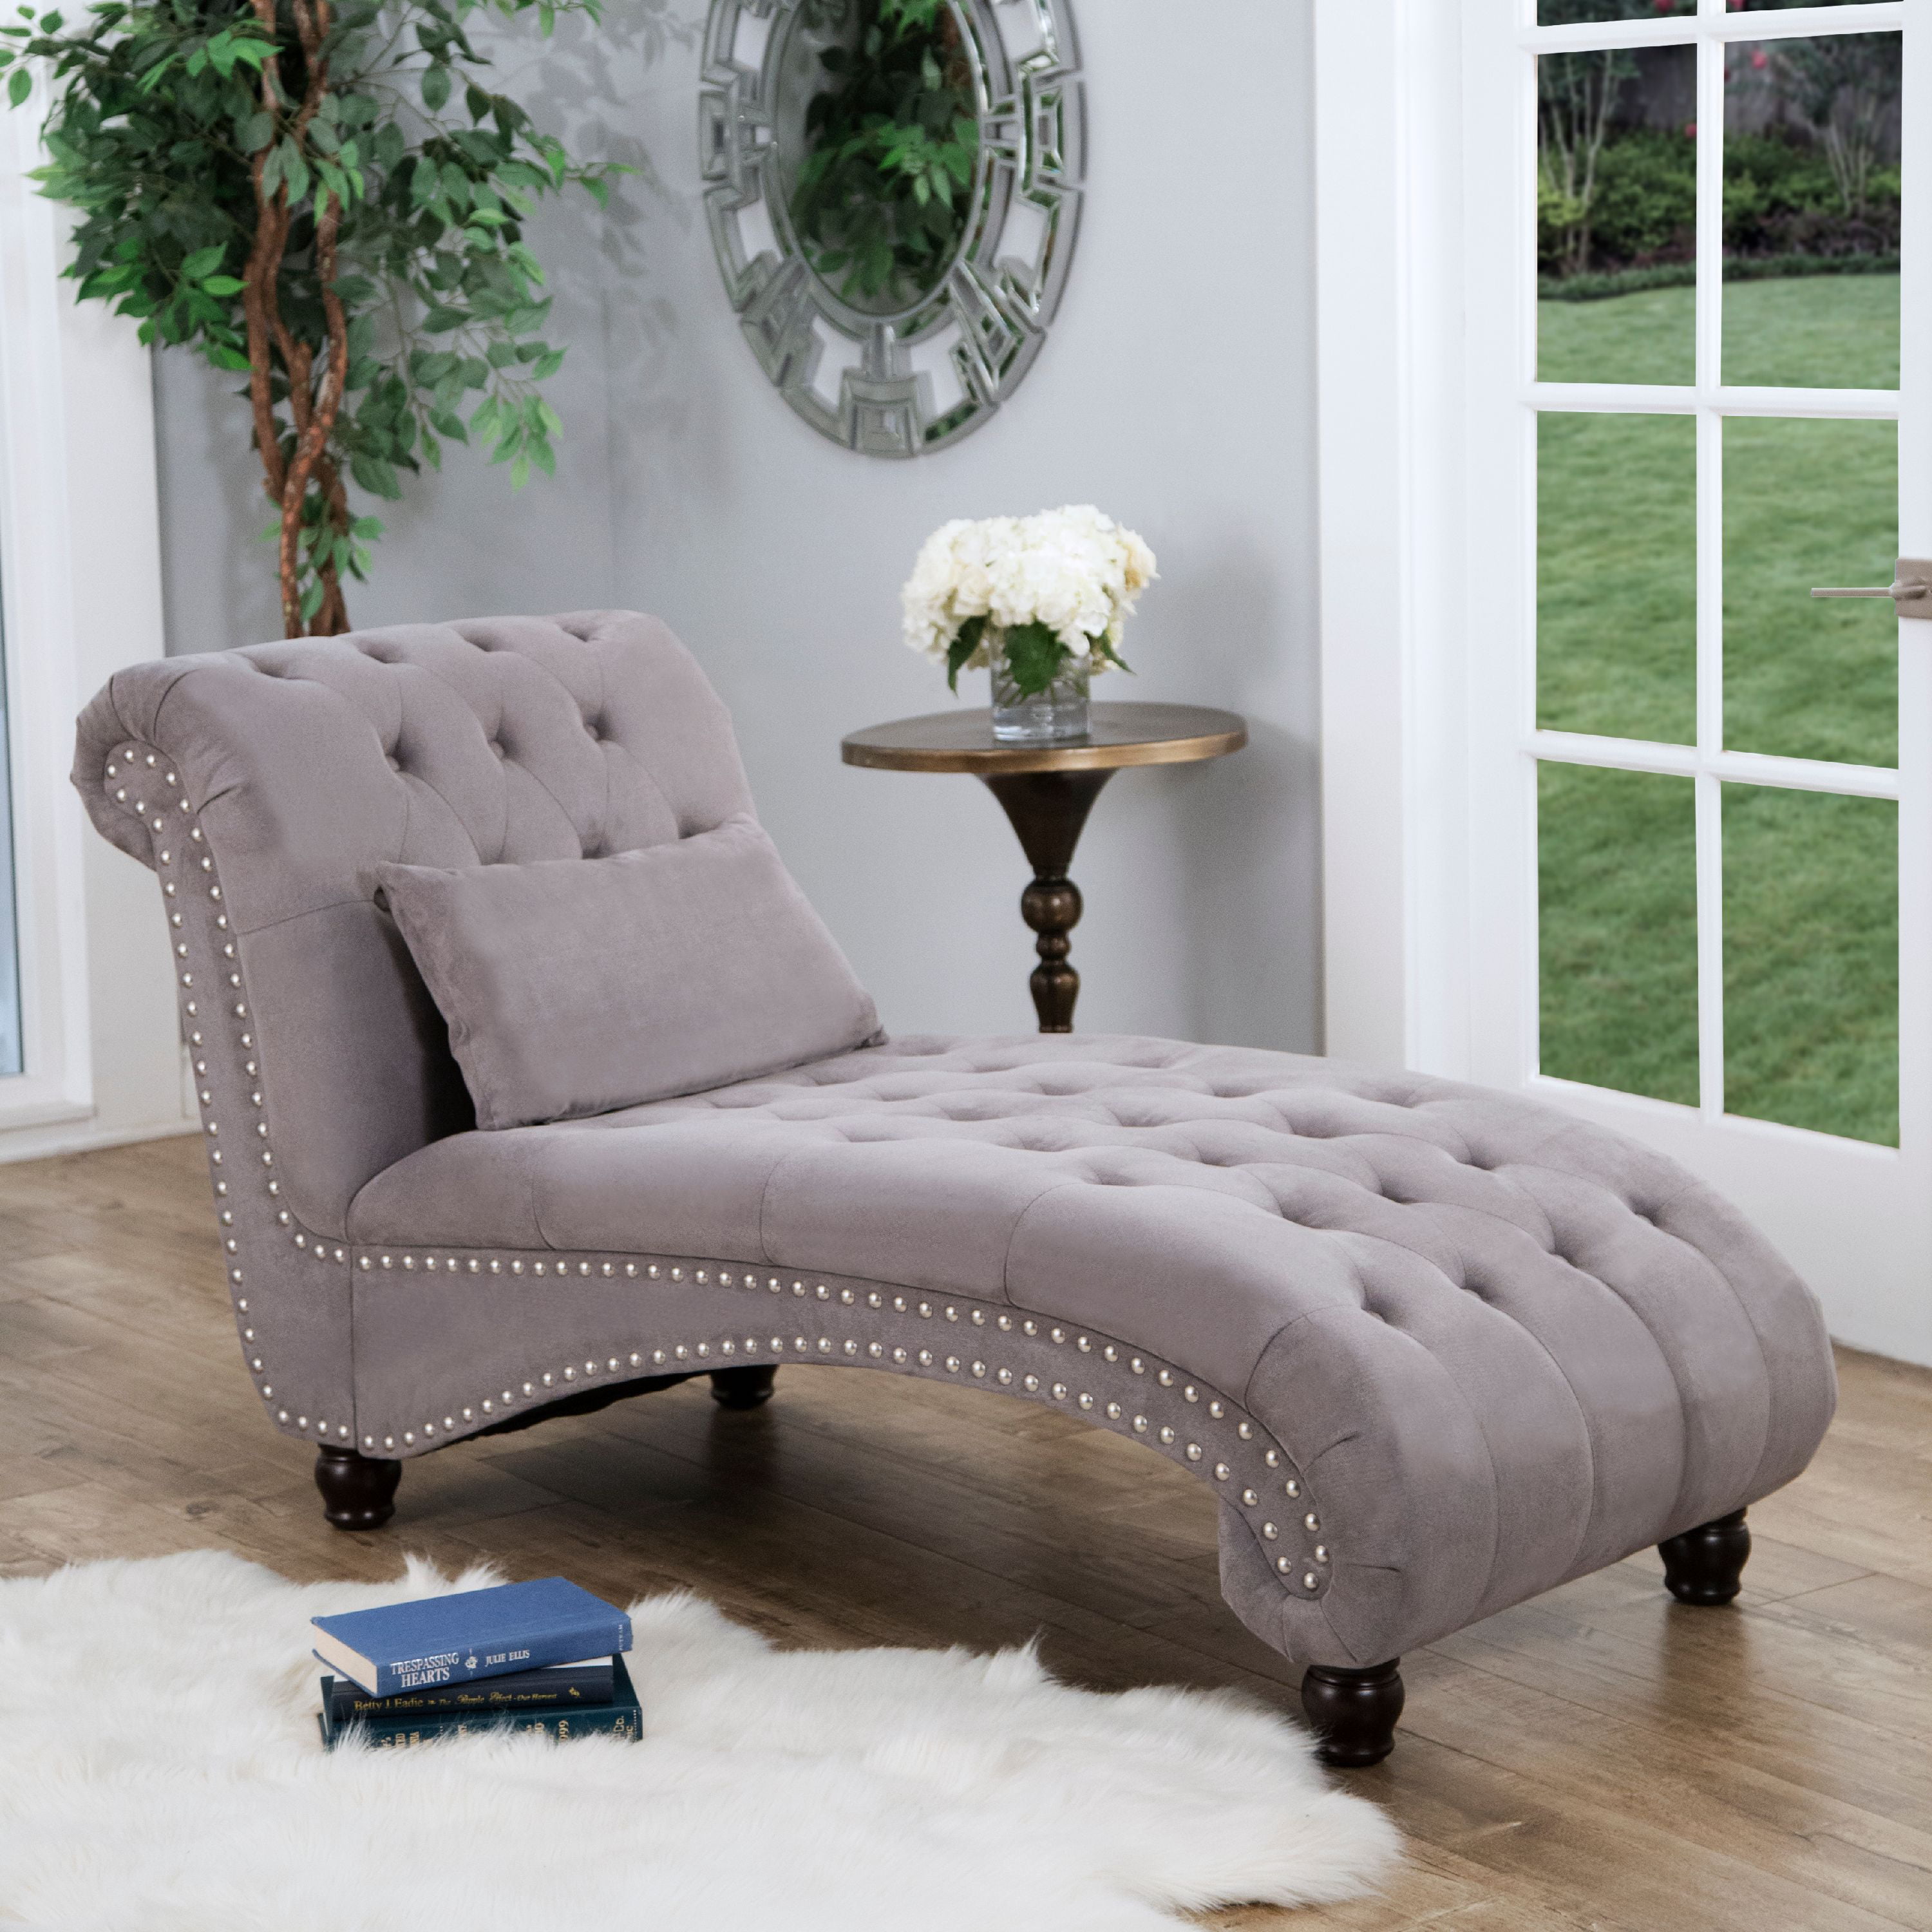 devon  claire cadence tufted oversized chaise lounge gray  walmart